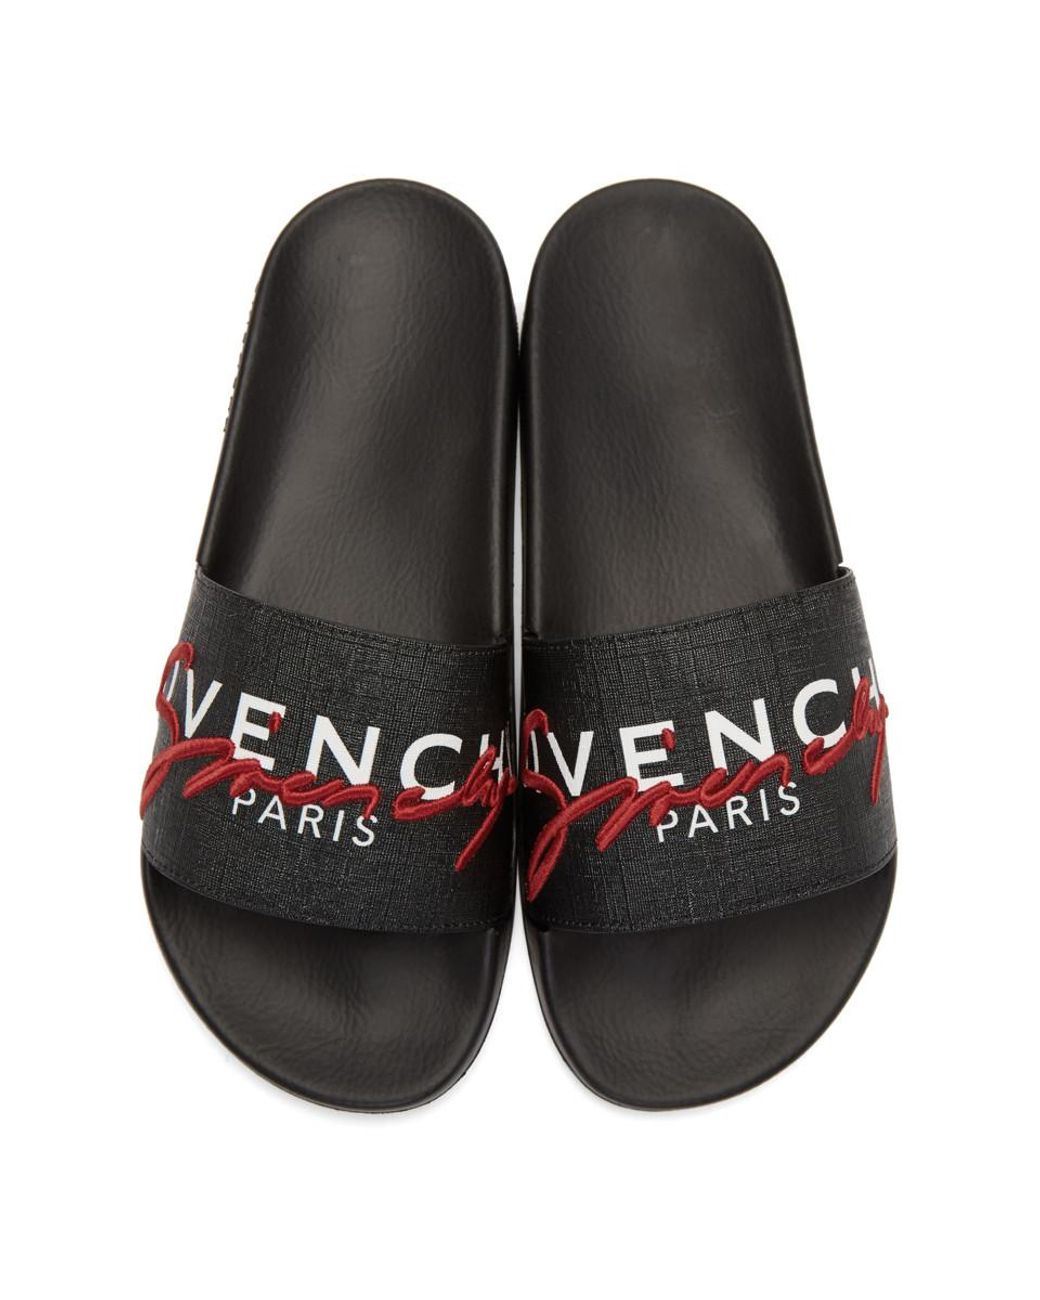 red and black givenchy slides